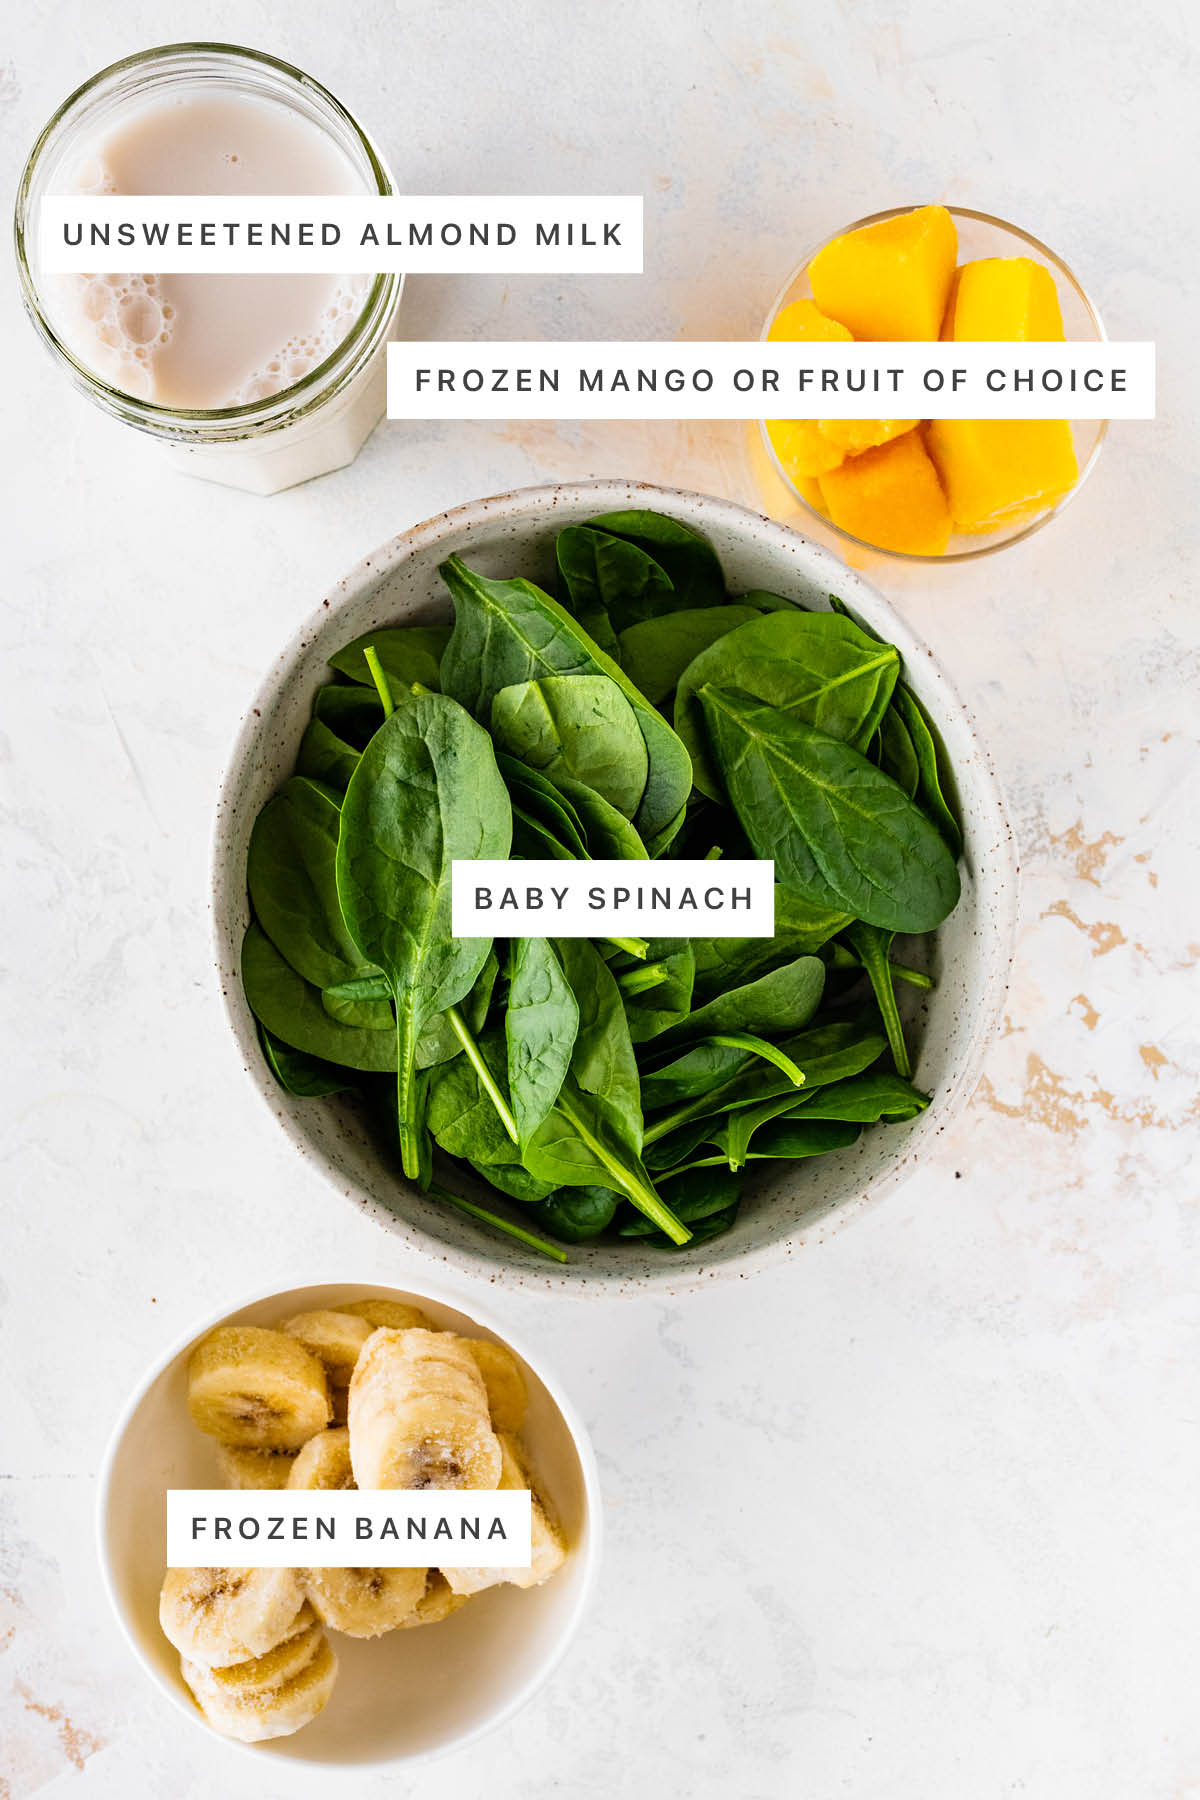 Ingredients measured out to make a Green Smoothie: almond milk, frozen mango, spinach and frozen banana.